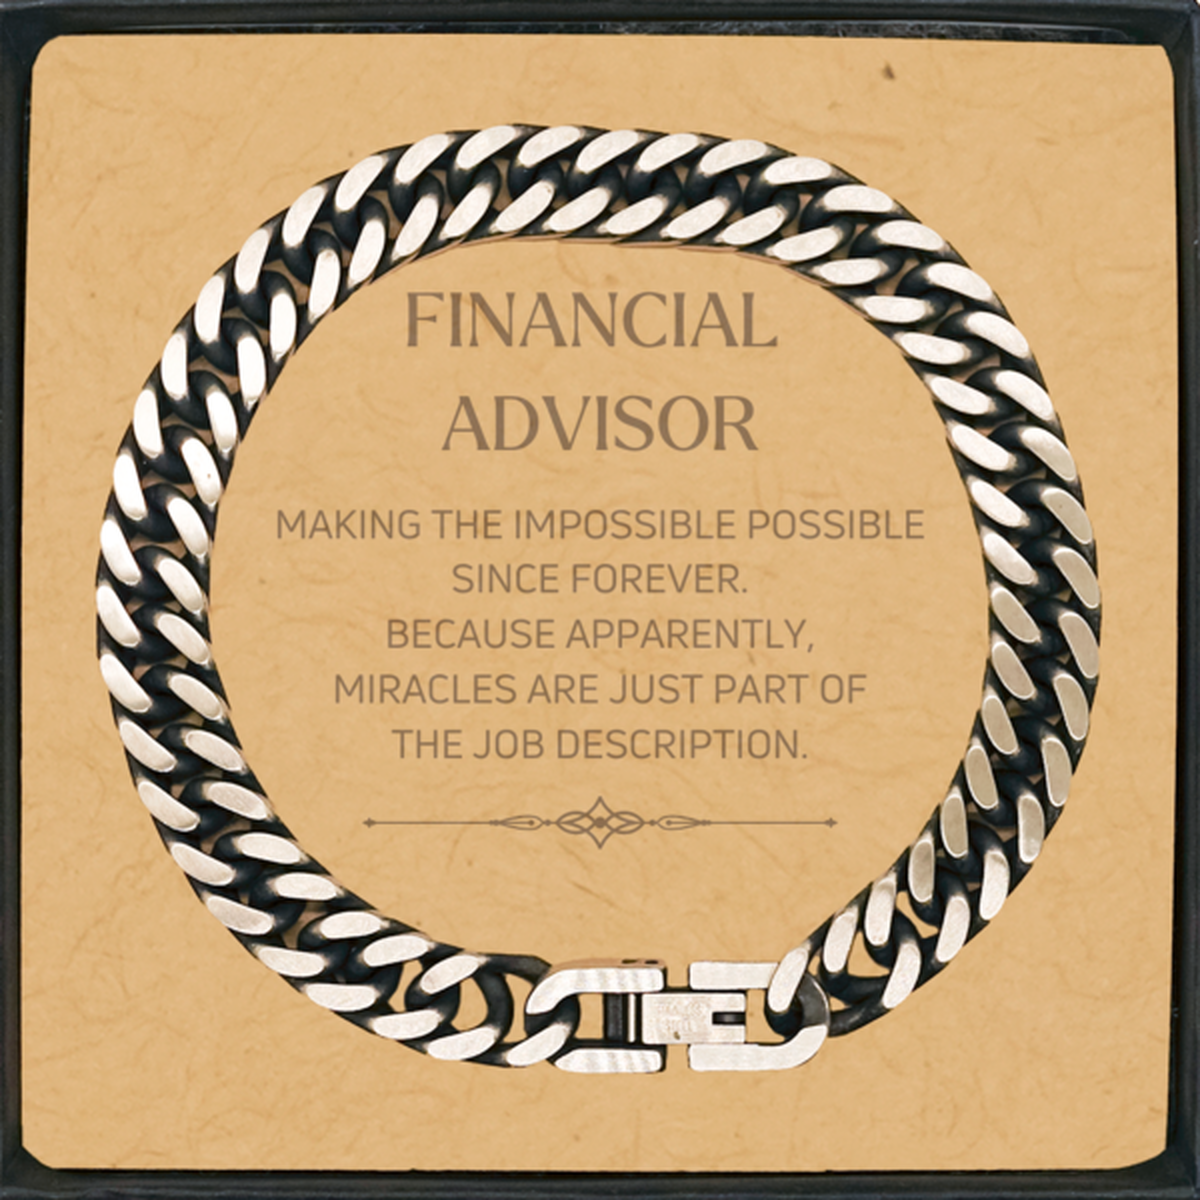 Funny Financial Advisor Gifts, Miracles are just part of the job description, Inspirational Birthday Cuban Link Chain Bracelet For Financial Advisor, Men, Women, Coworkers, Friends, Boss